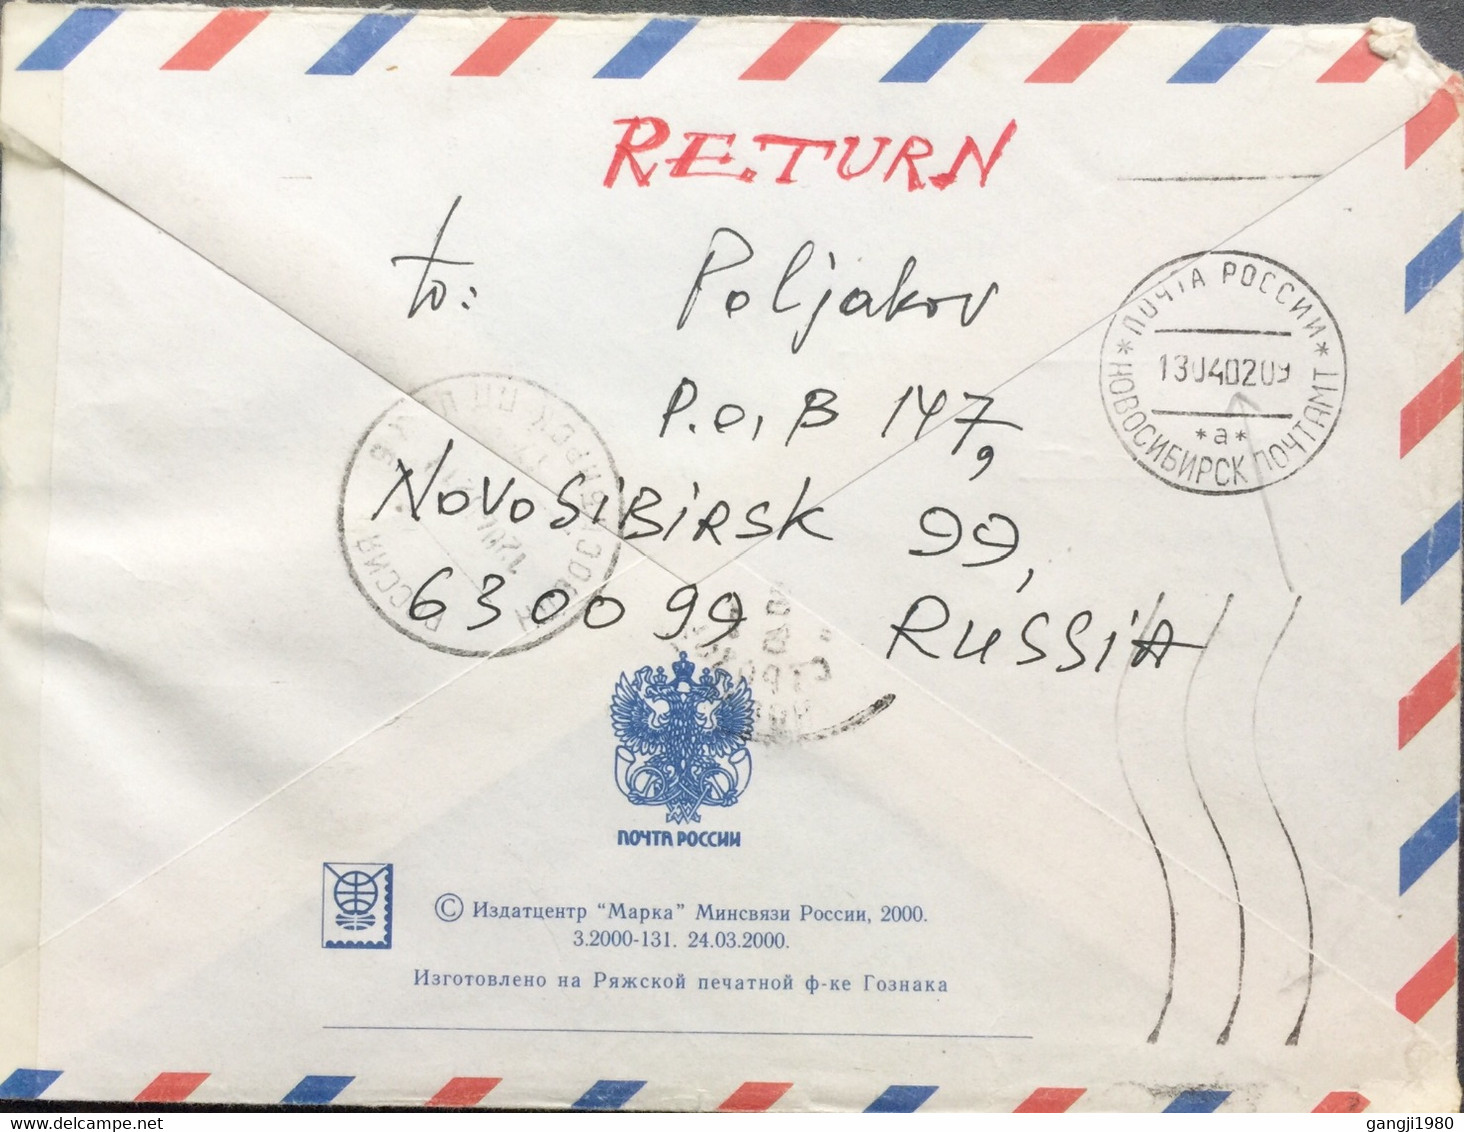 RUSSIA-IRAEL 2001, USED COVER TO ISRAEL,RETURN TO SENDER,NOVO SIBIRSK CANCELLATION! REACHED AFTER 7 MONTH!!! INTERESTING - Briefe U. Dokumente